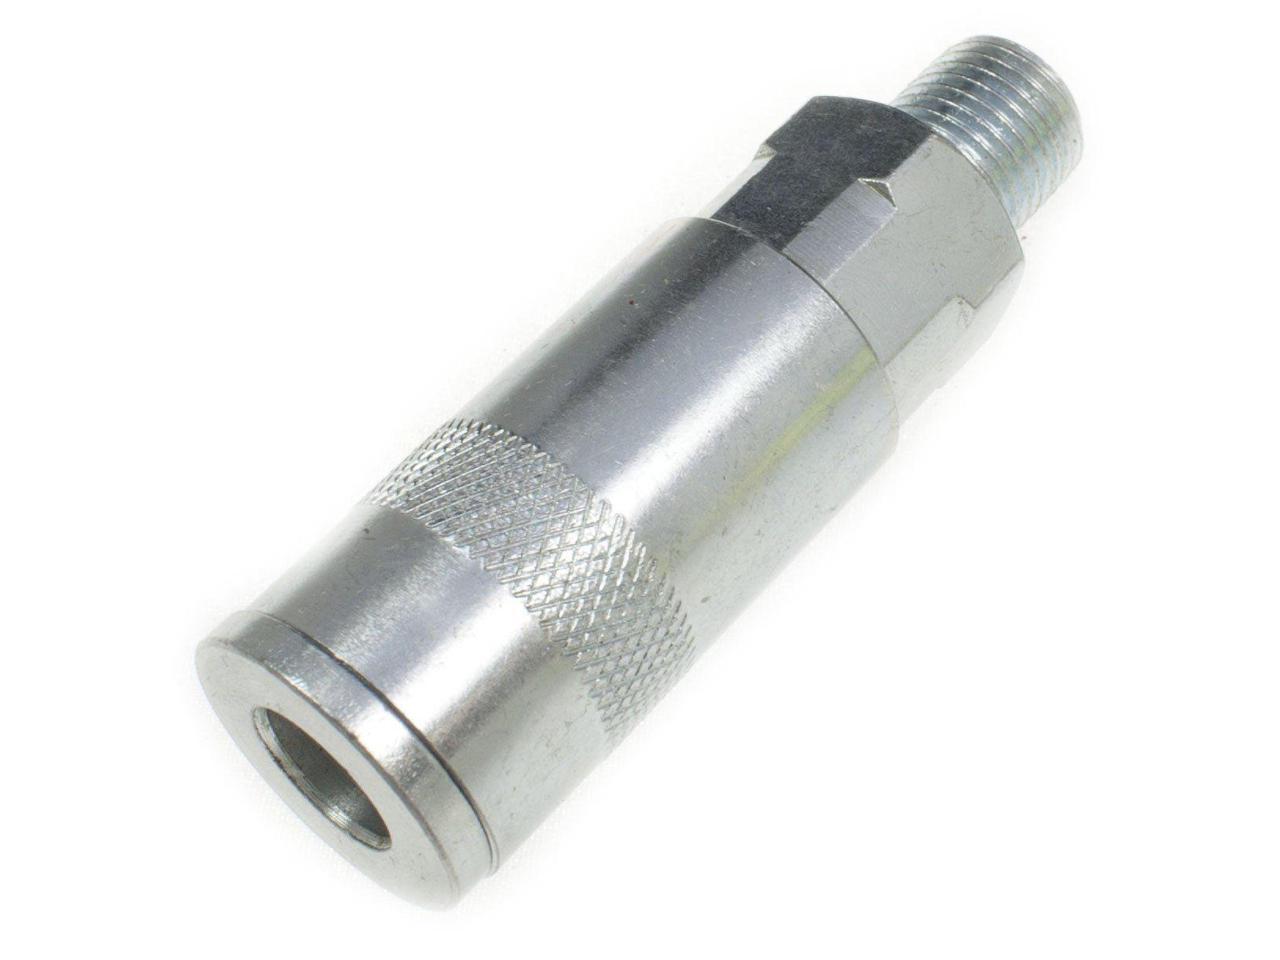 AIR LINE QUICK COUPLER 1/4' BSP FIT PCL BAYONET CONNECTOR COUPLING CONNECTION 